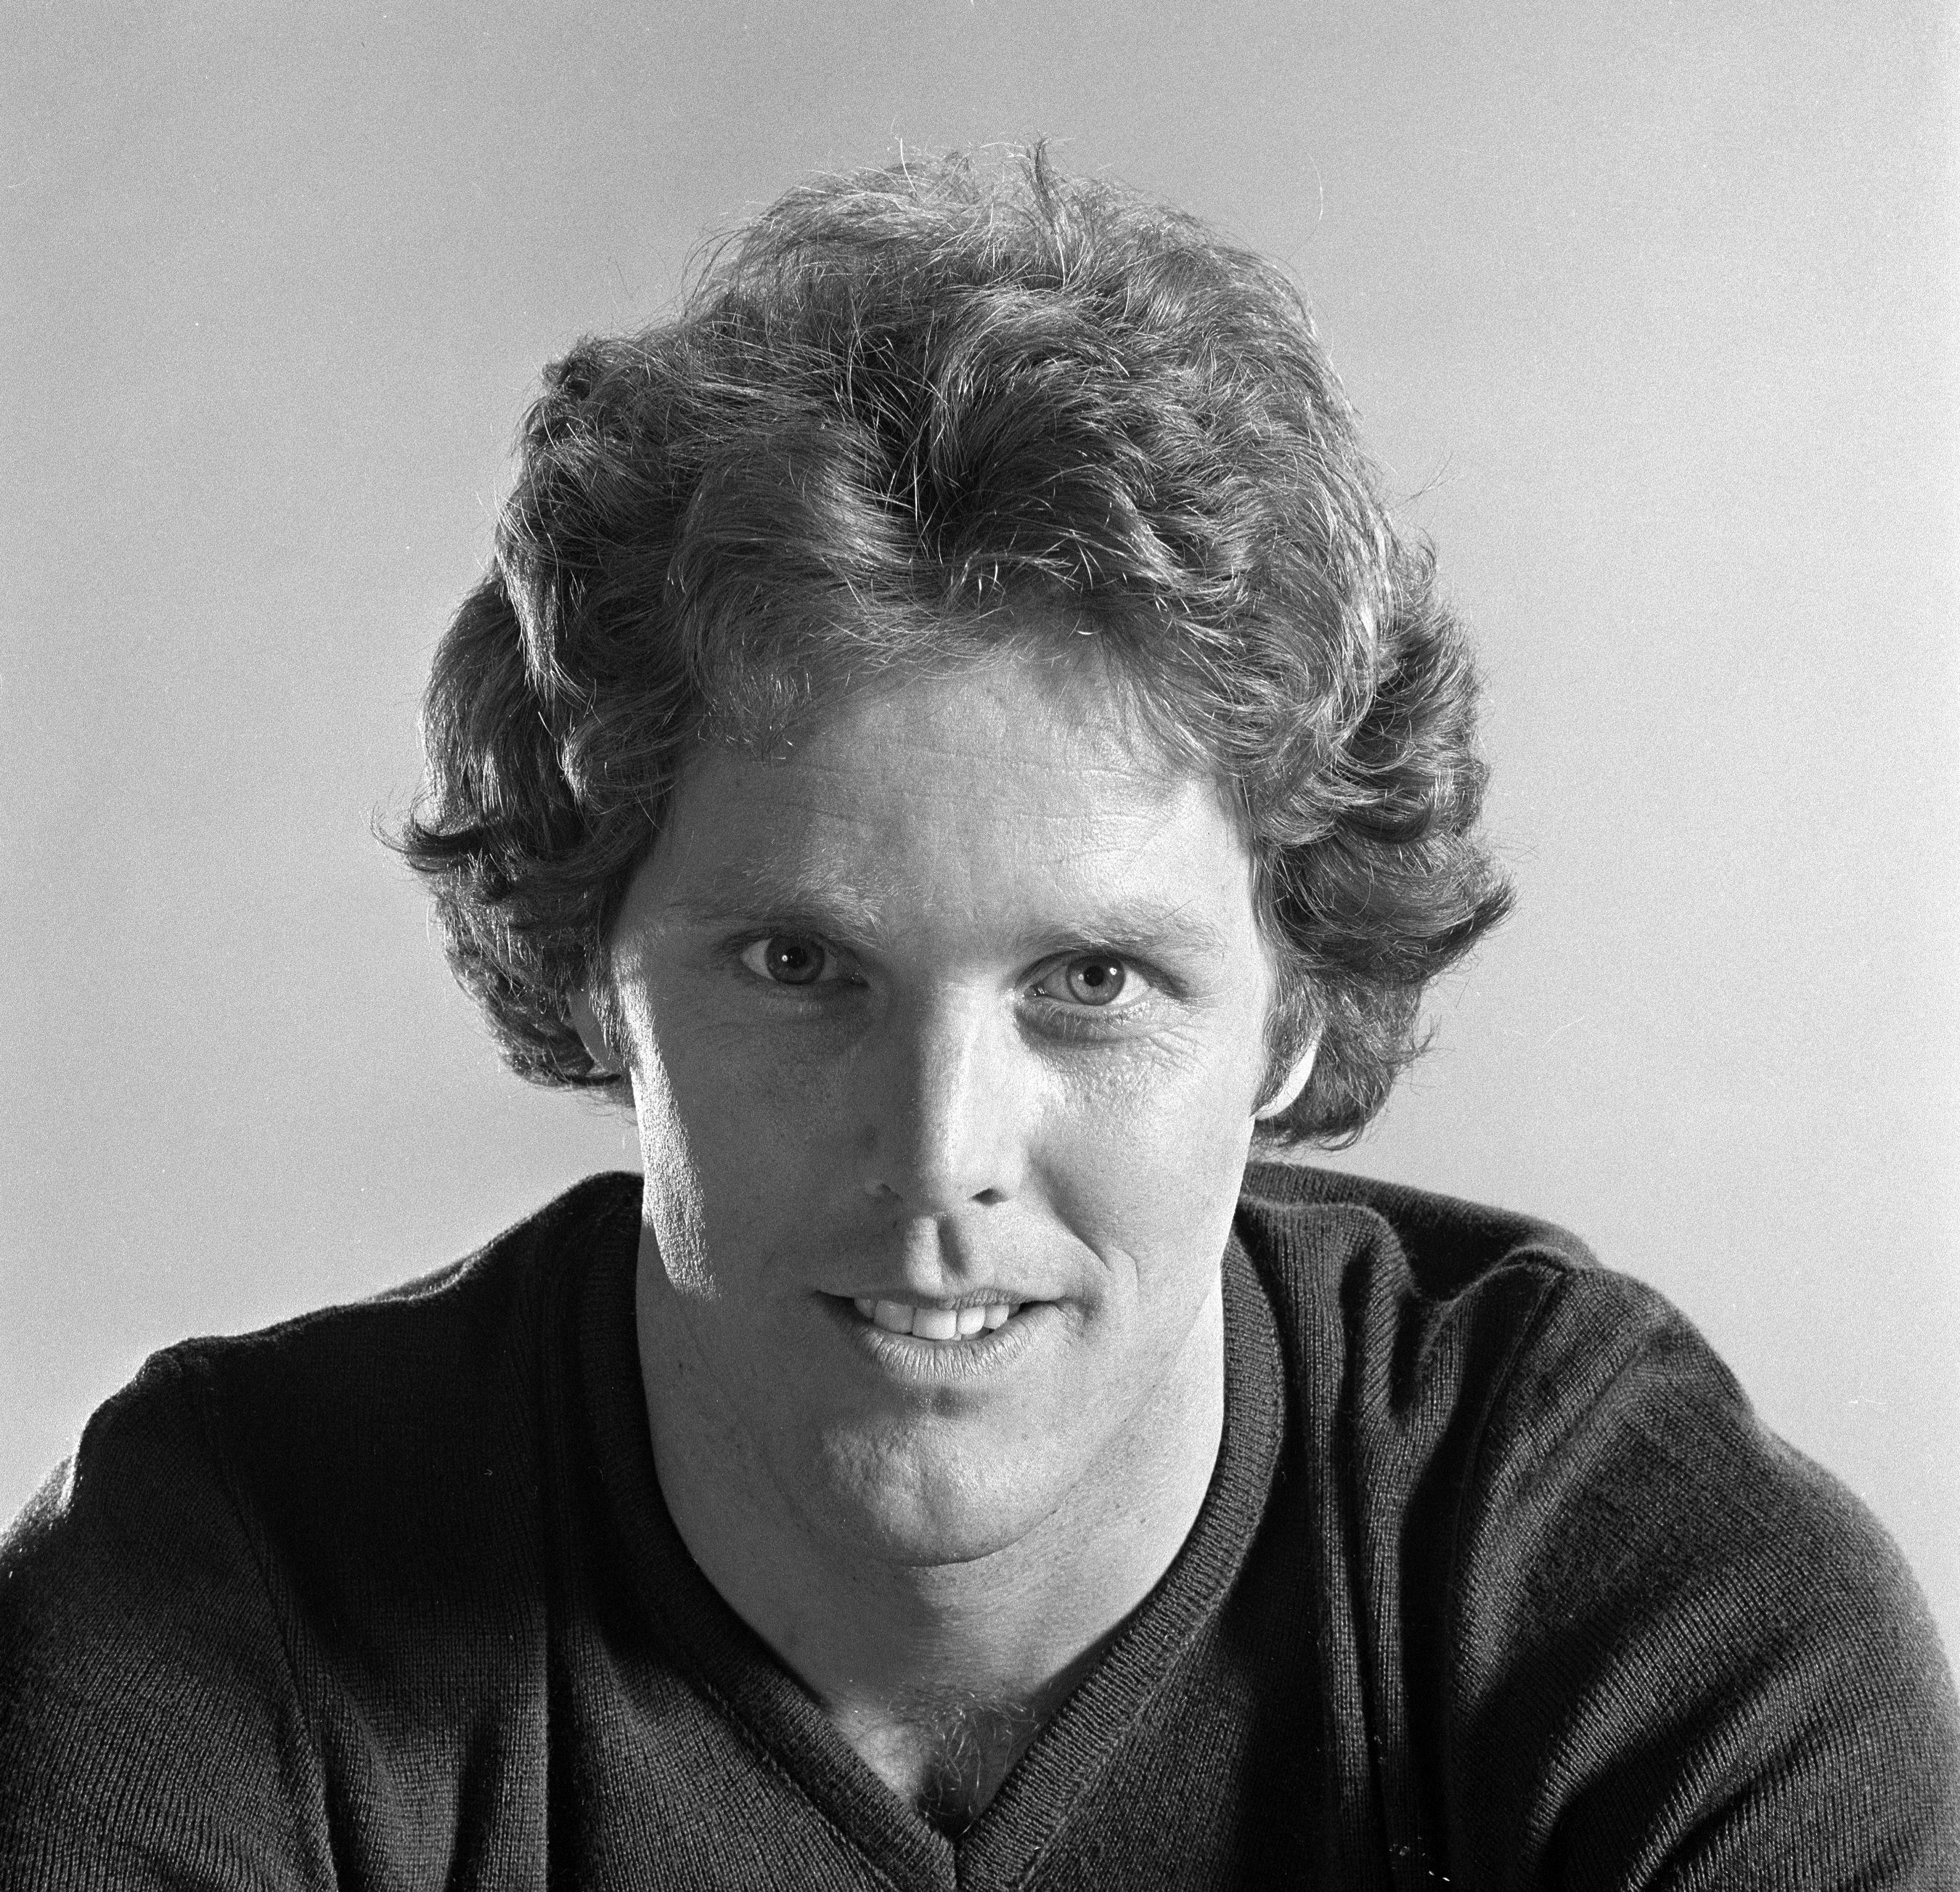 Wings Hauser in Los Angeles in 1978 | Source: Getty Images